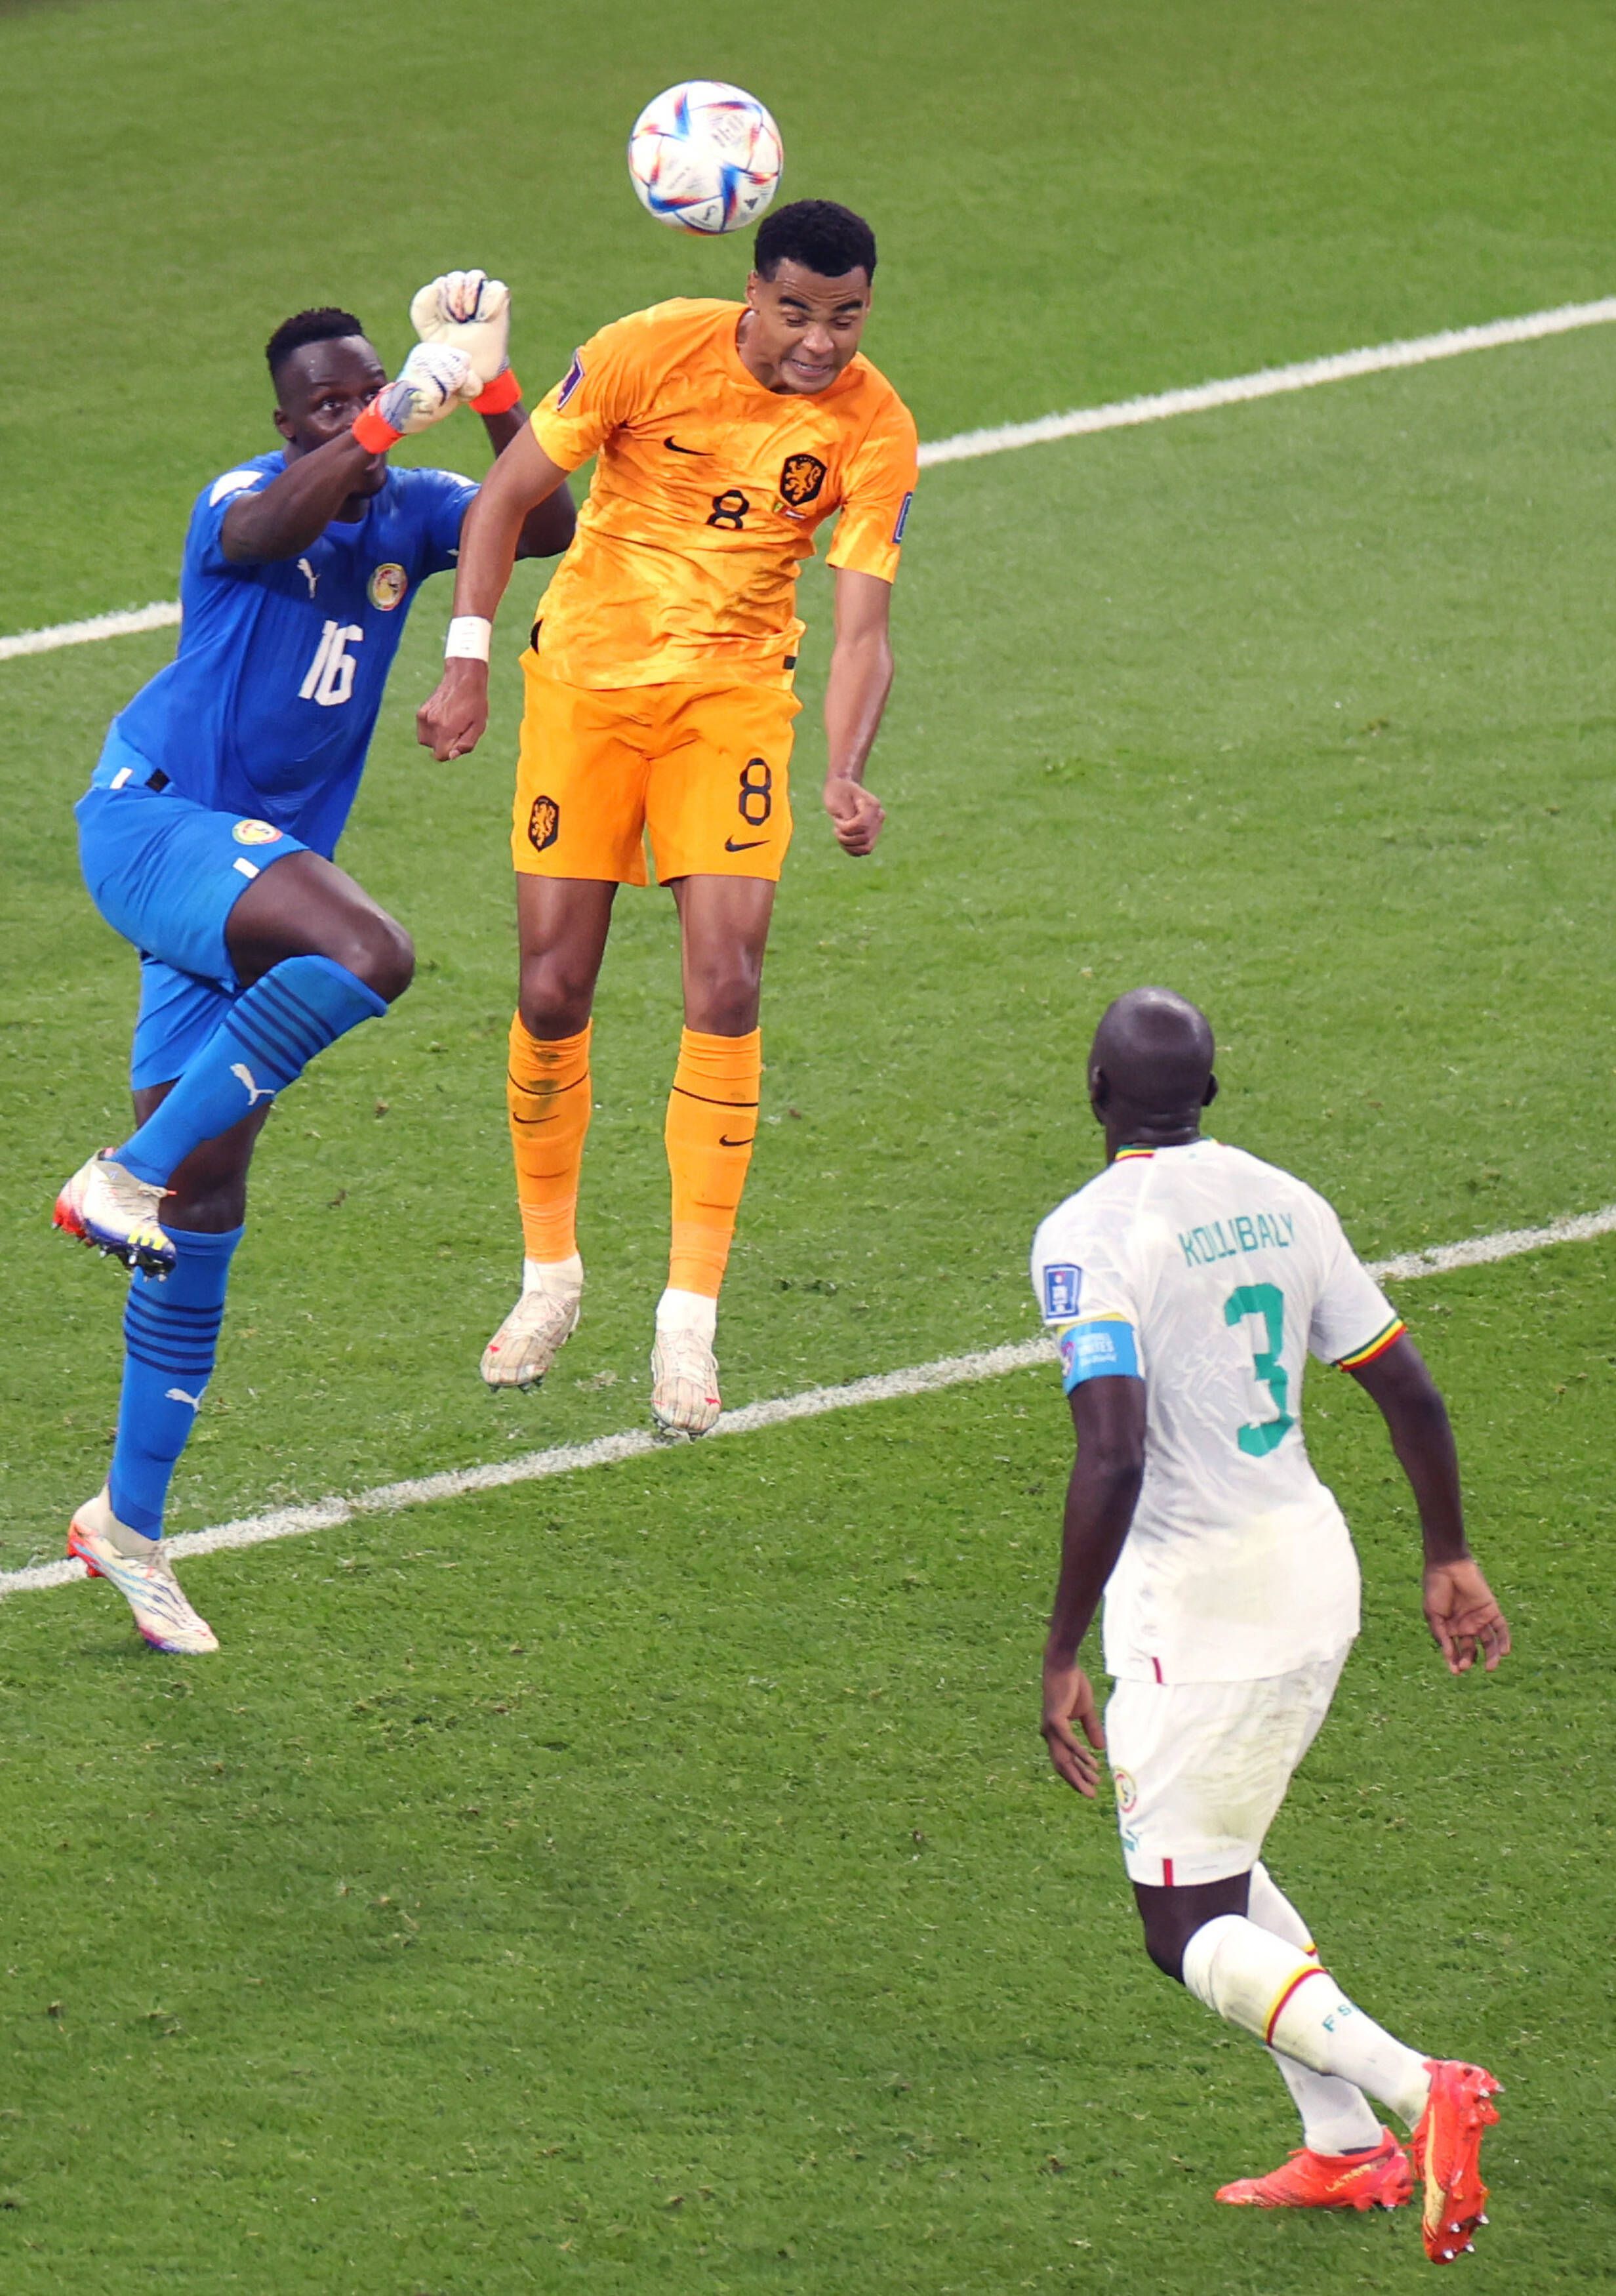 Cody Gakpo rose highest to punish the unconvincing Edouard Mendy and put the Netherlands ahead